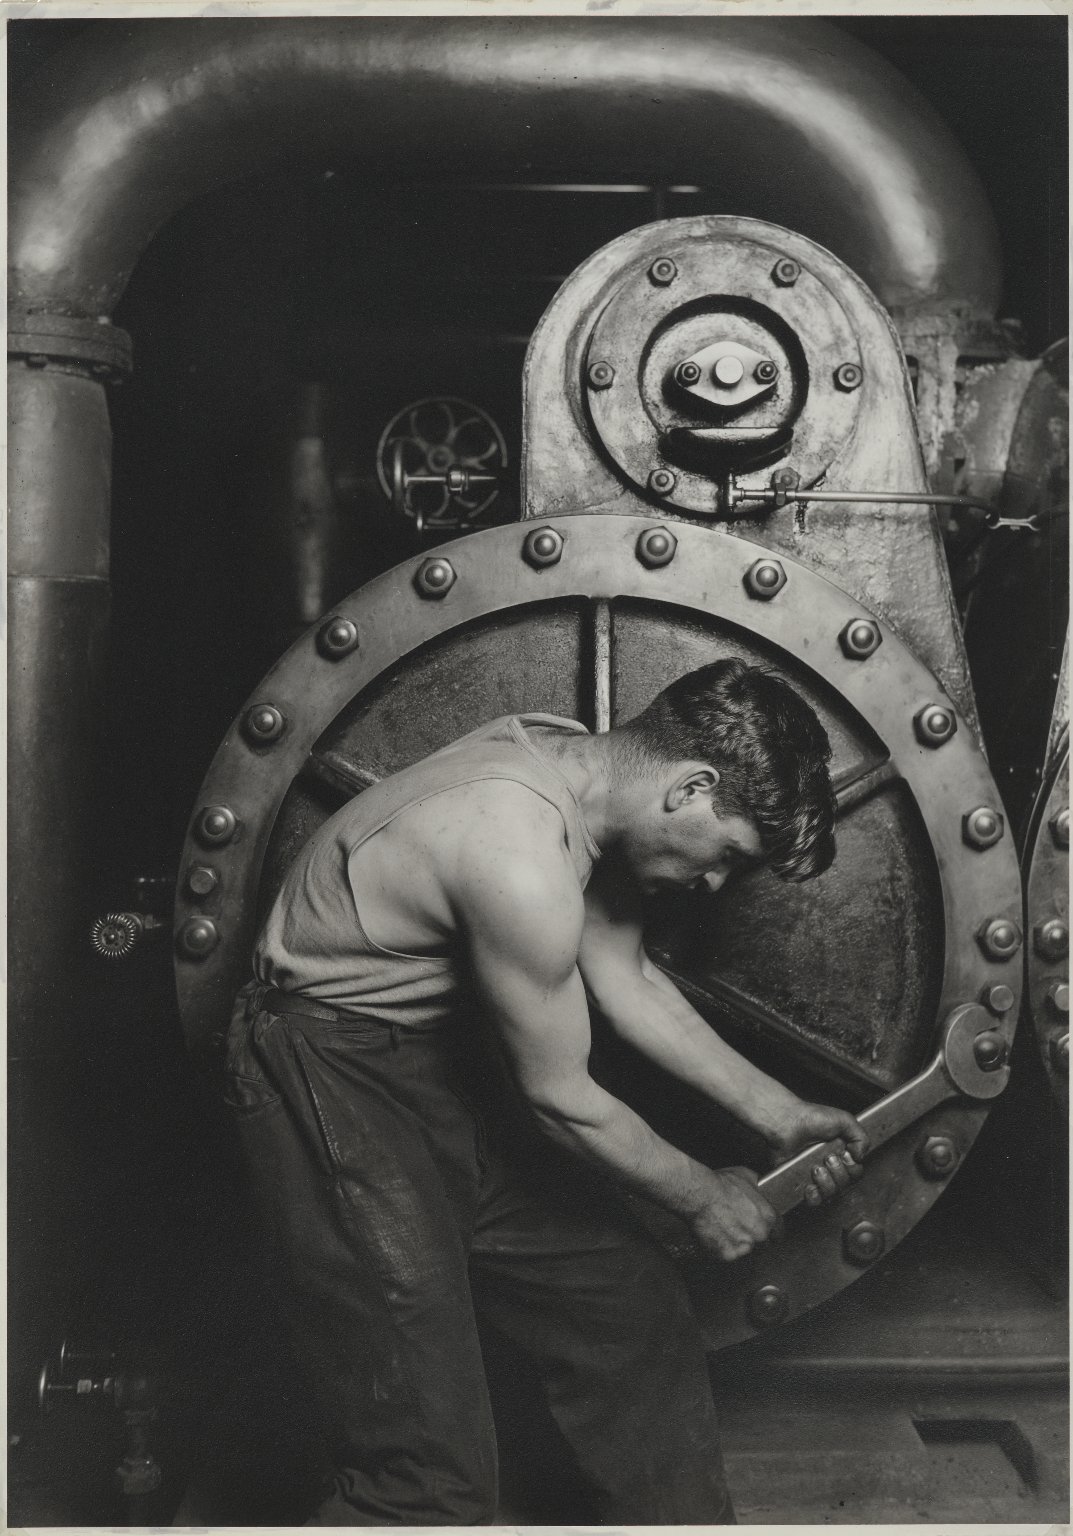 Power House Mechanic by Lewis Wickes Hine